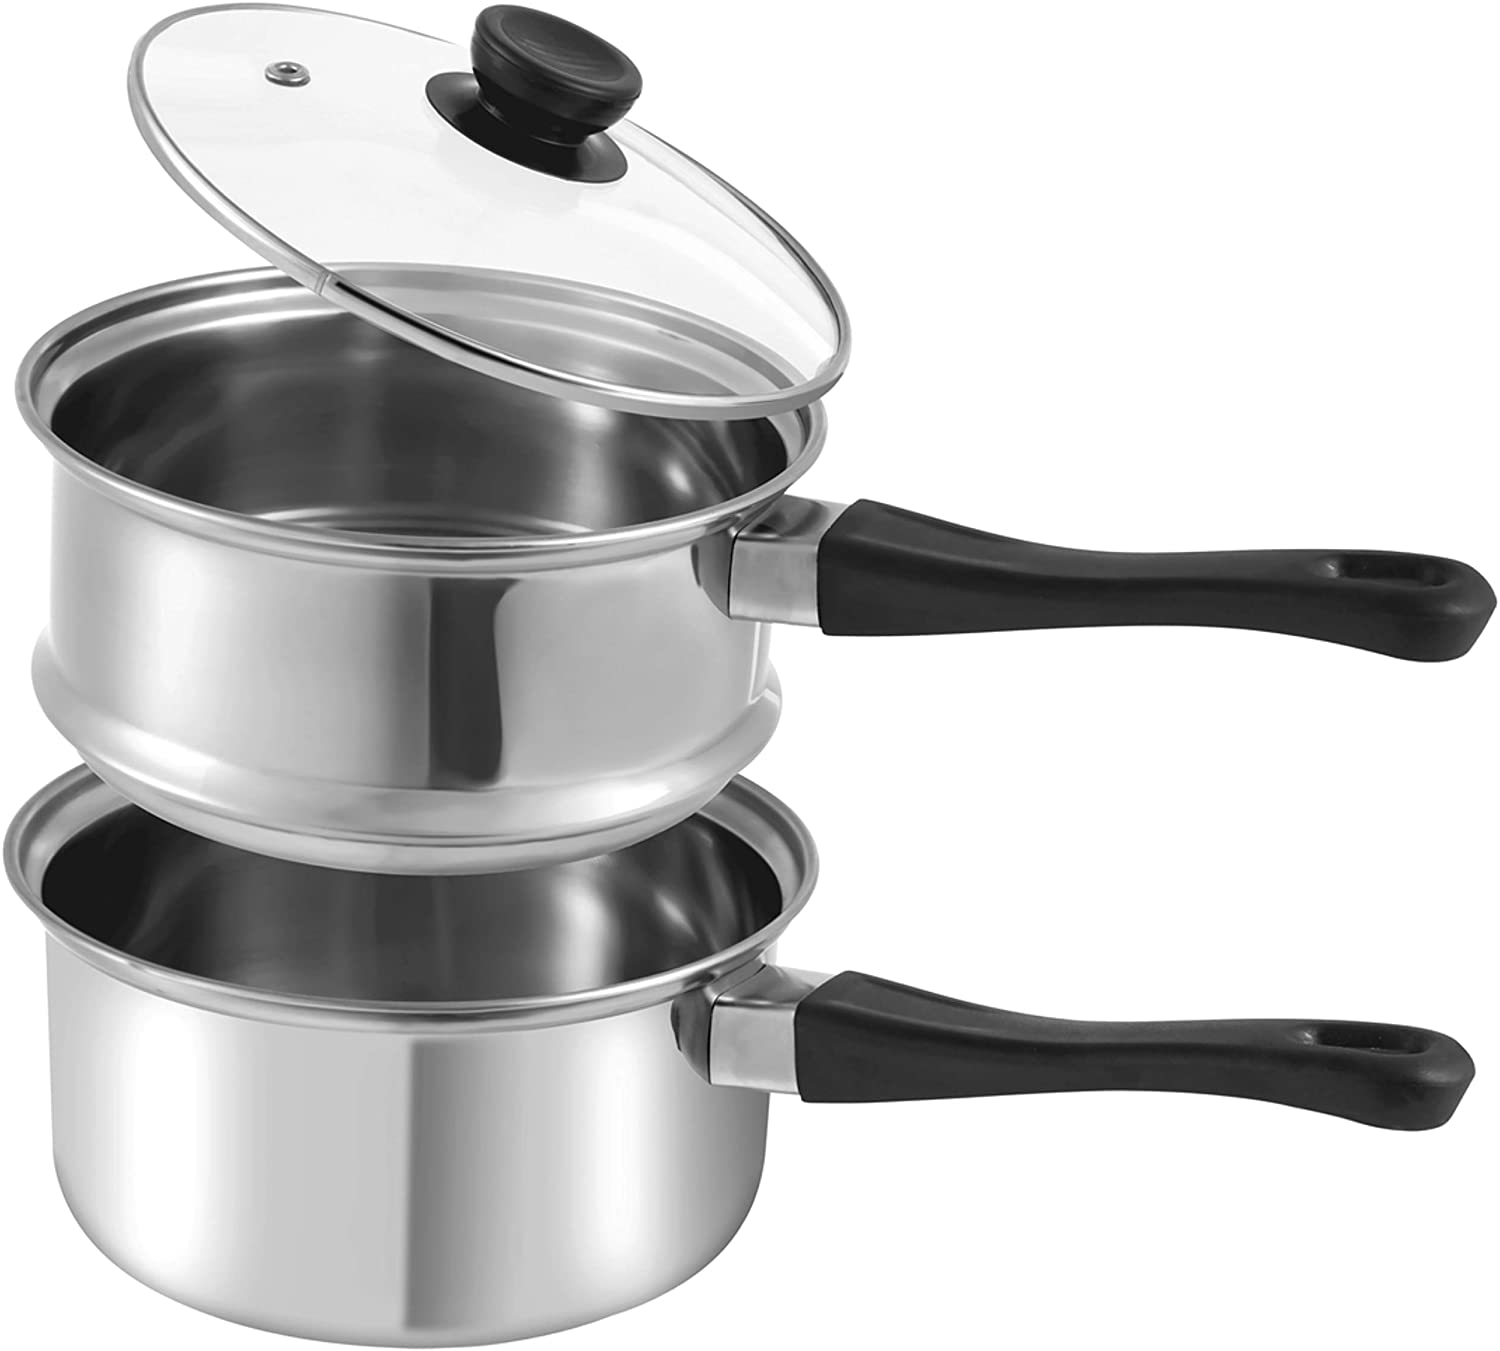 2 Pack Double Boiler Pot Set Stainless Steel Melting Pot For Melting  Chocolate Soap Wax Candle Making 600Ml And 1600Ml